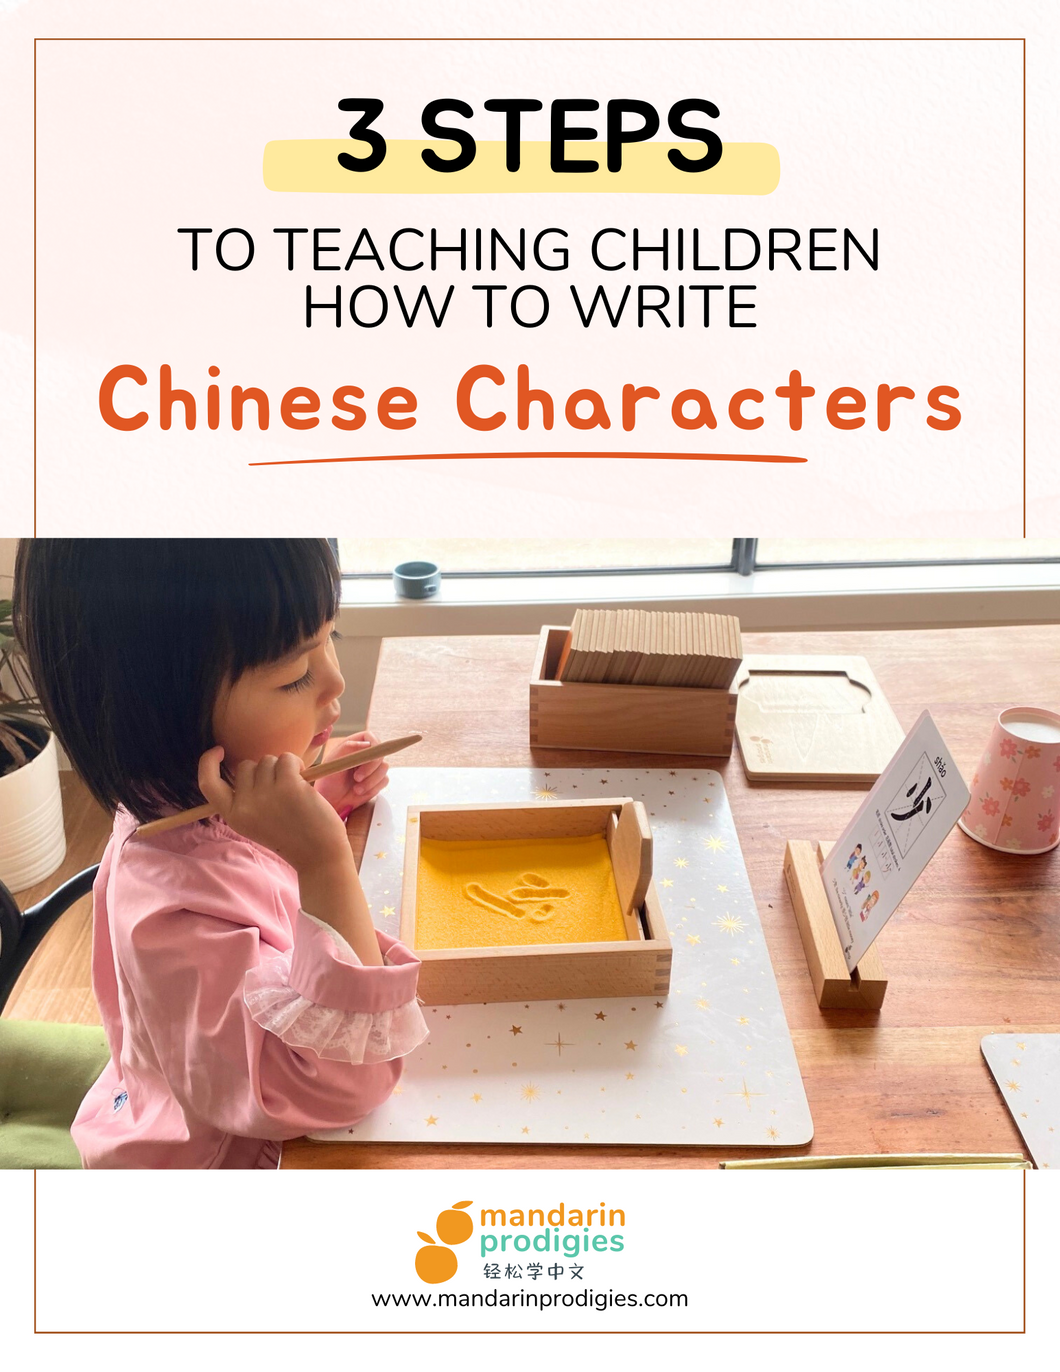 3 Steps to Teach Children How to Write Chinese Characters